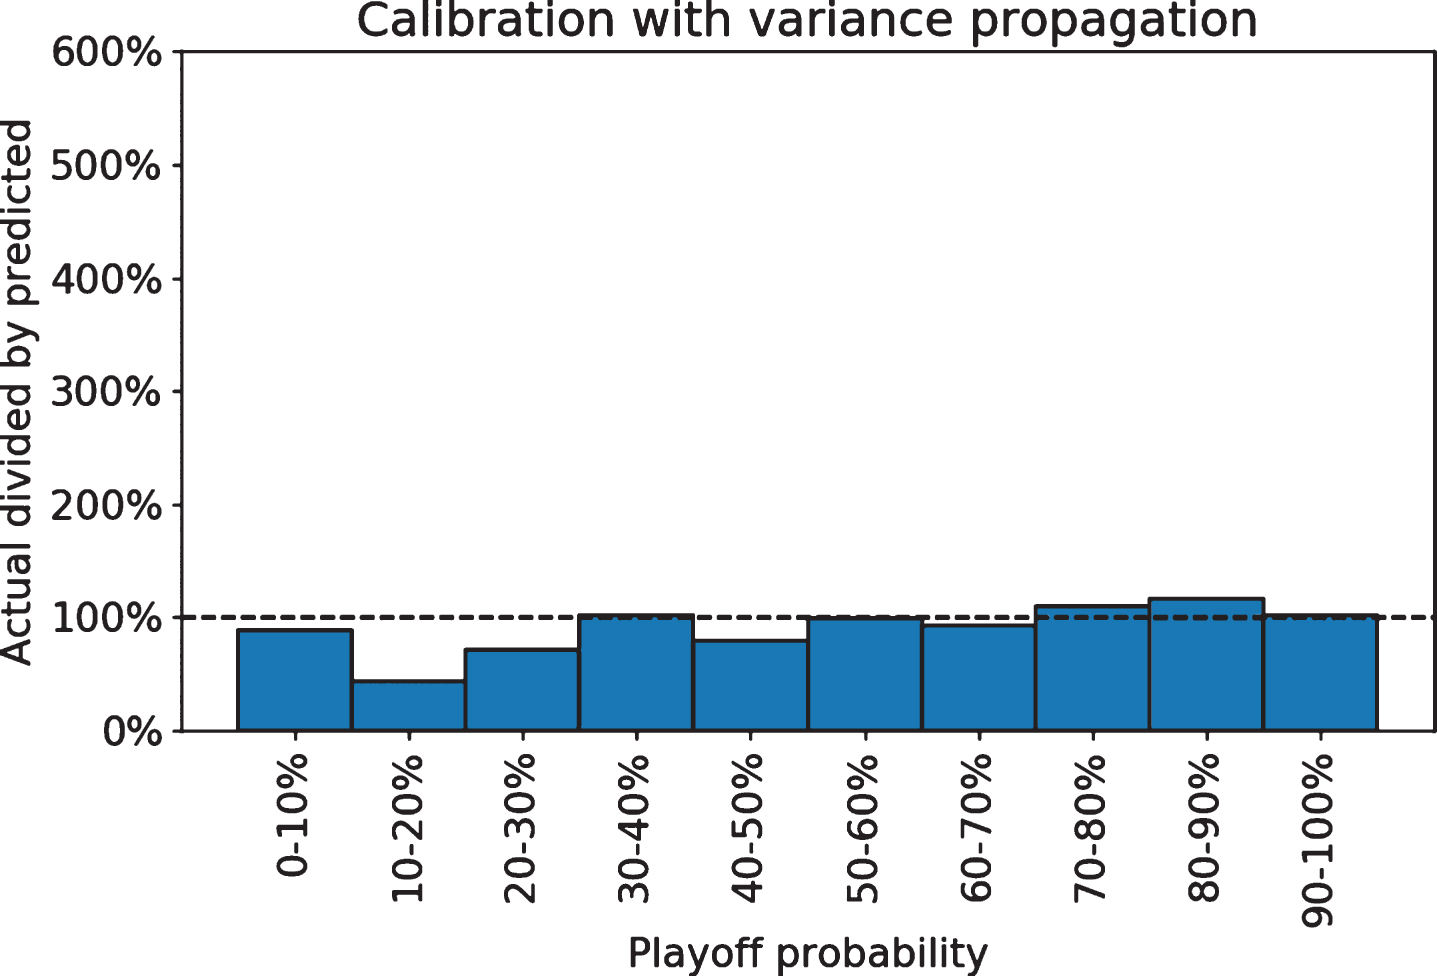 Playoff probabilities with propagation do not show systematic bias.